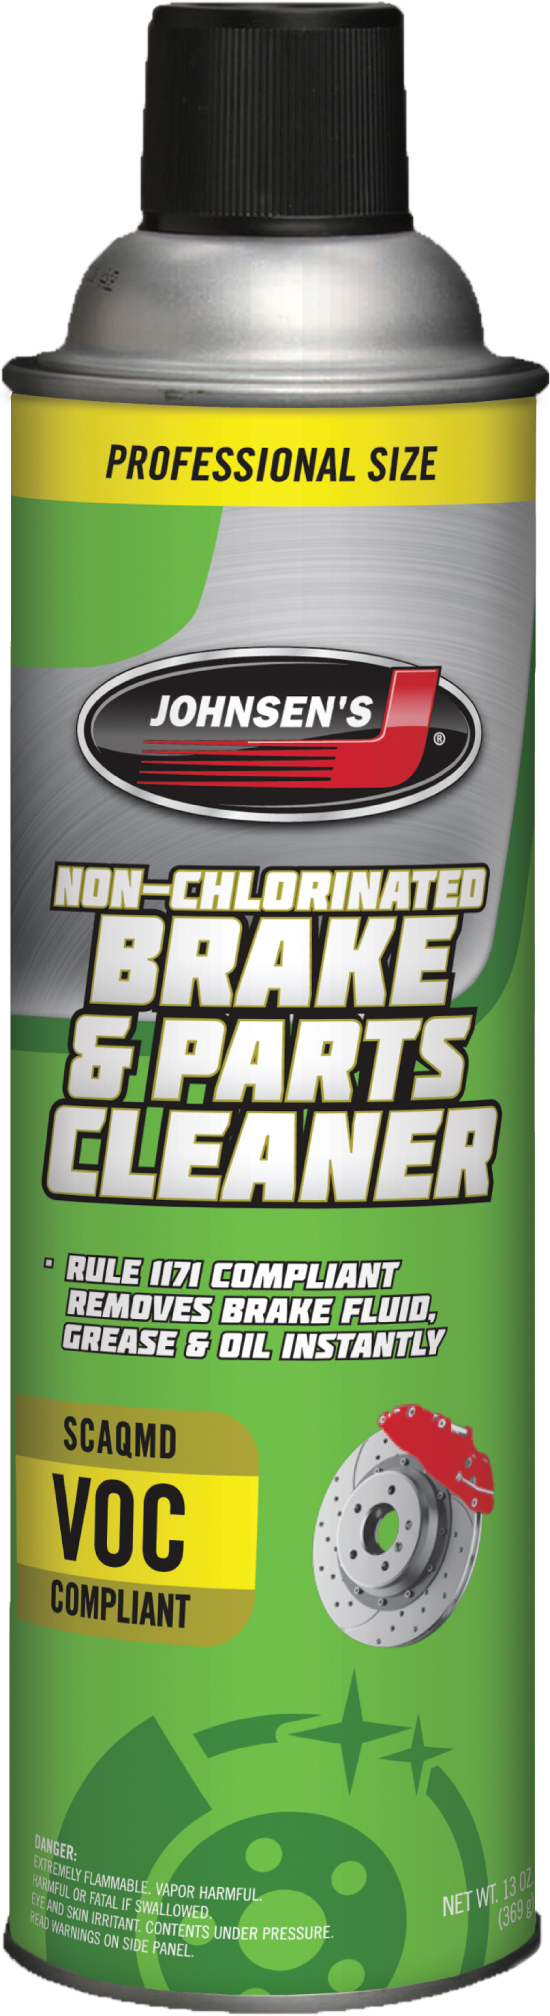 Brake and Parts Cleaner 1 Gallon